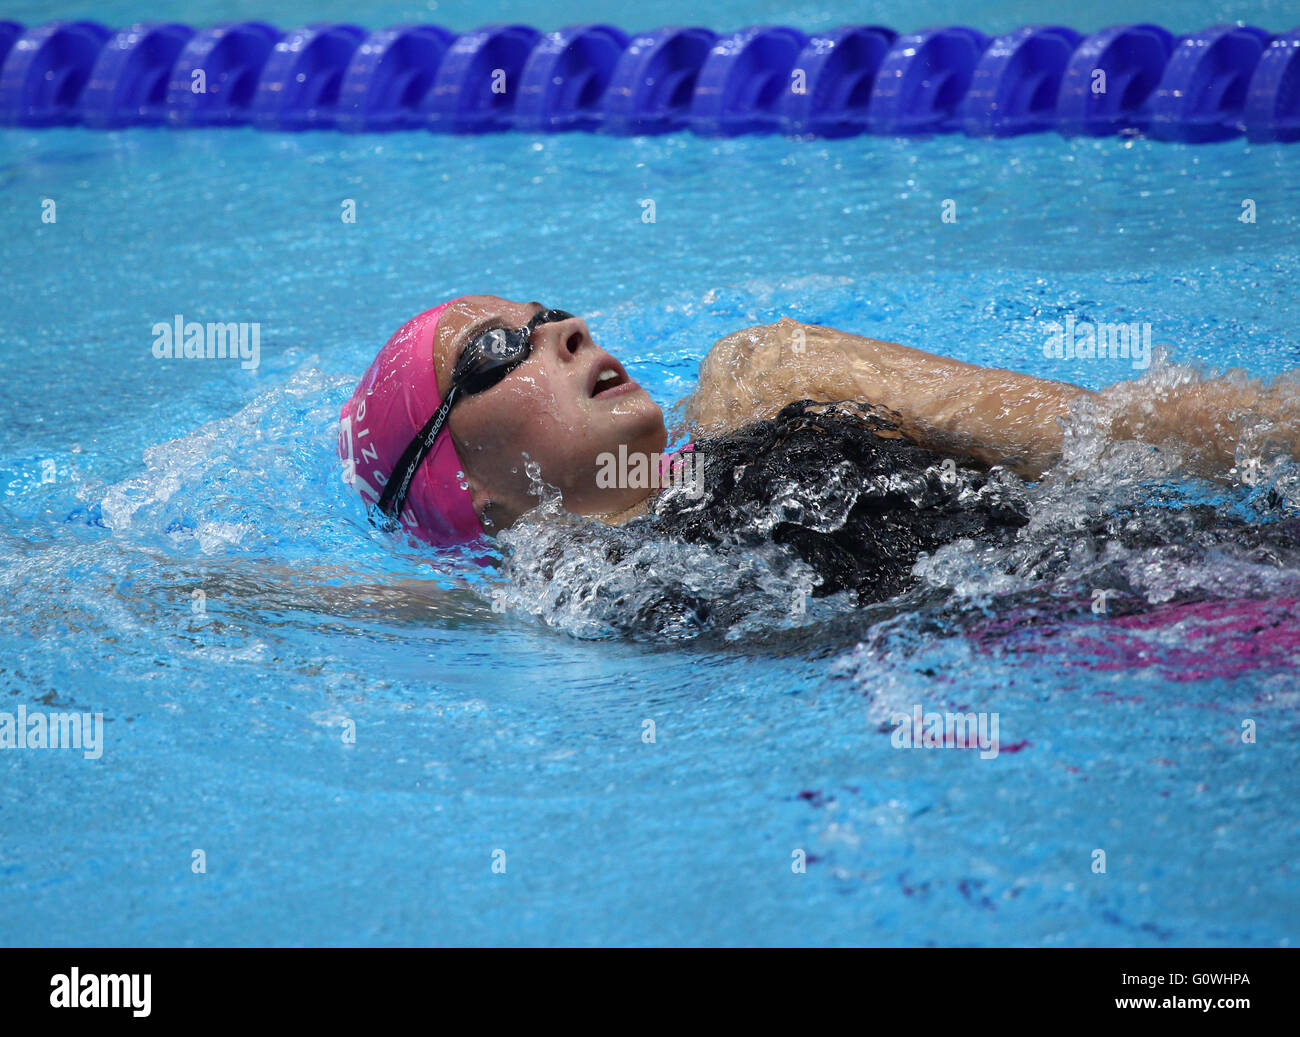 Berlin, Germany. 5th May, 2016. Member of the Leipzig SSG swimming team competes in the 400m Individual Medley Stock Photo